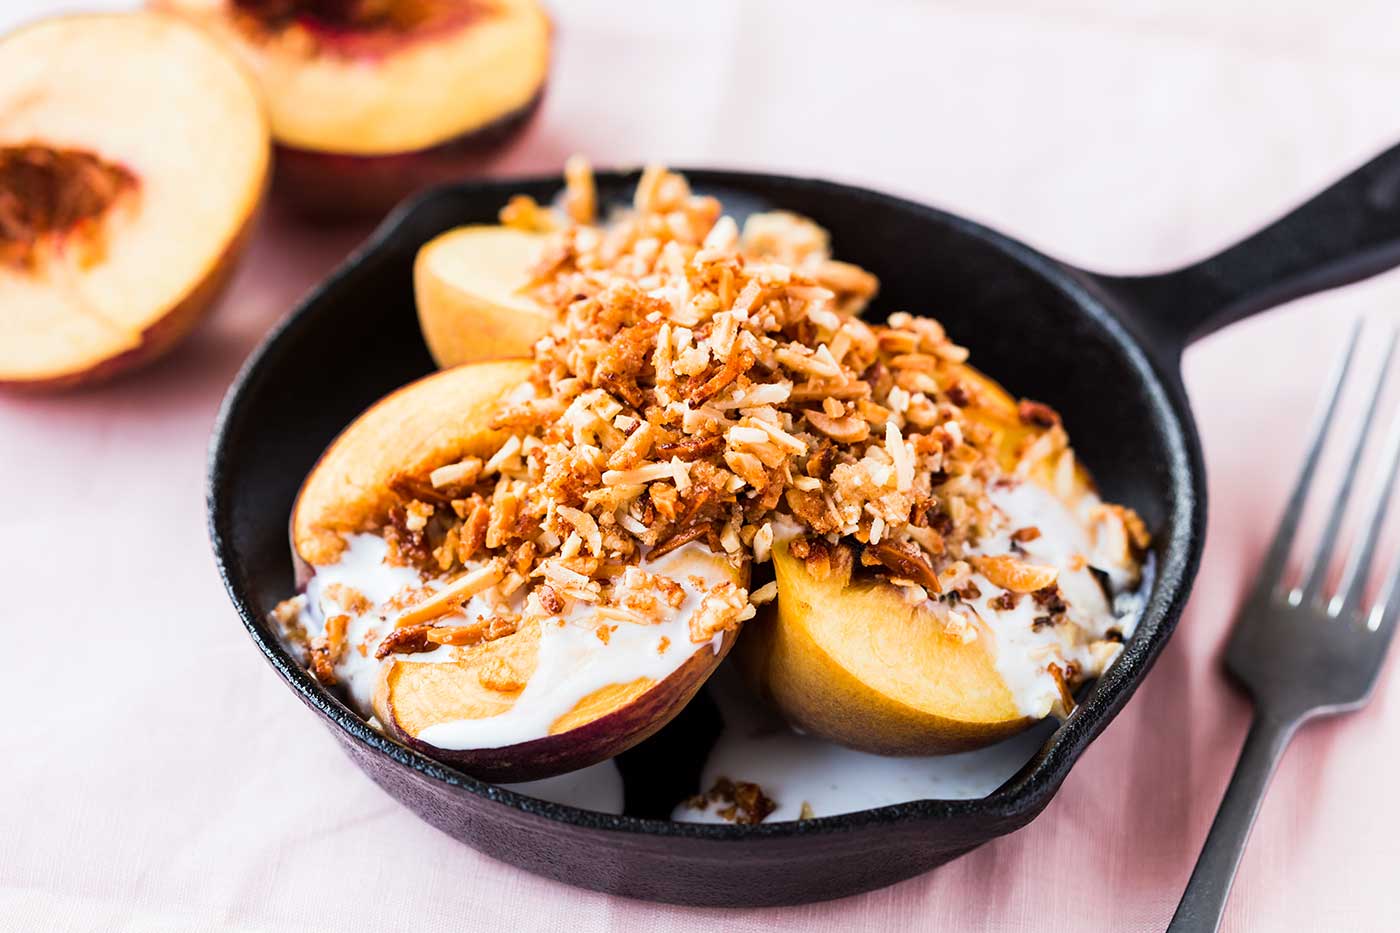 Grilled-Peaches-with-Coconut-Cream-and-Almond-Crumble-Thermomix-Recipe